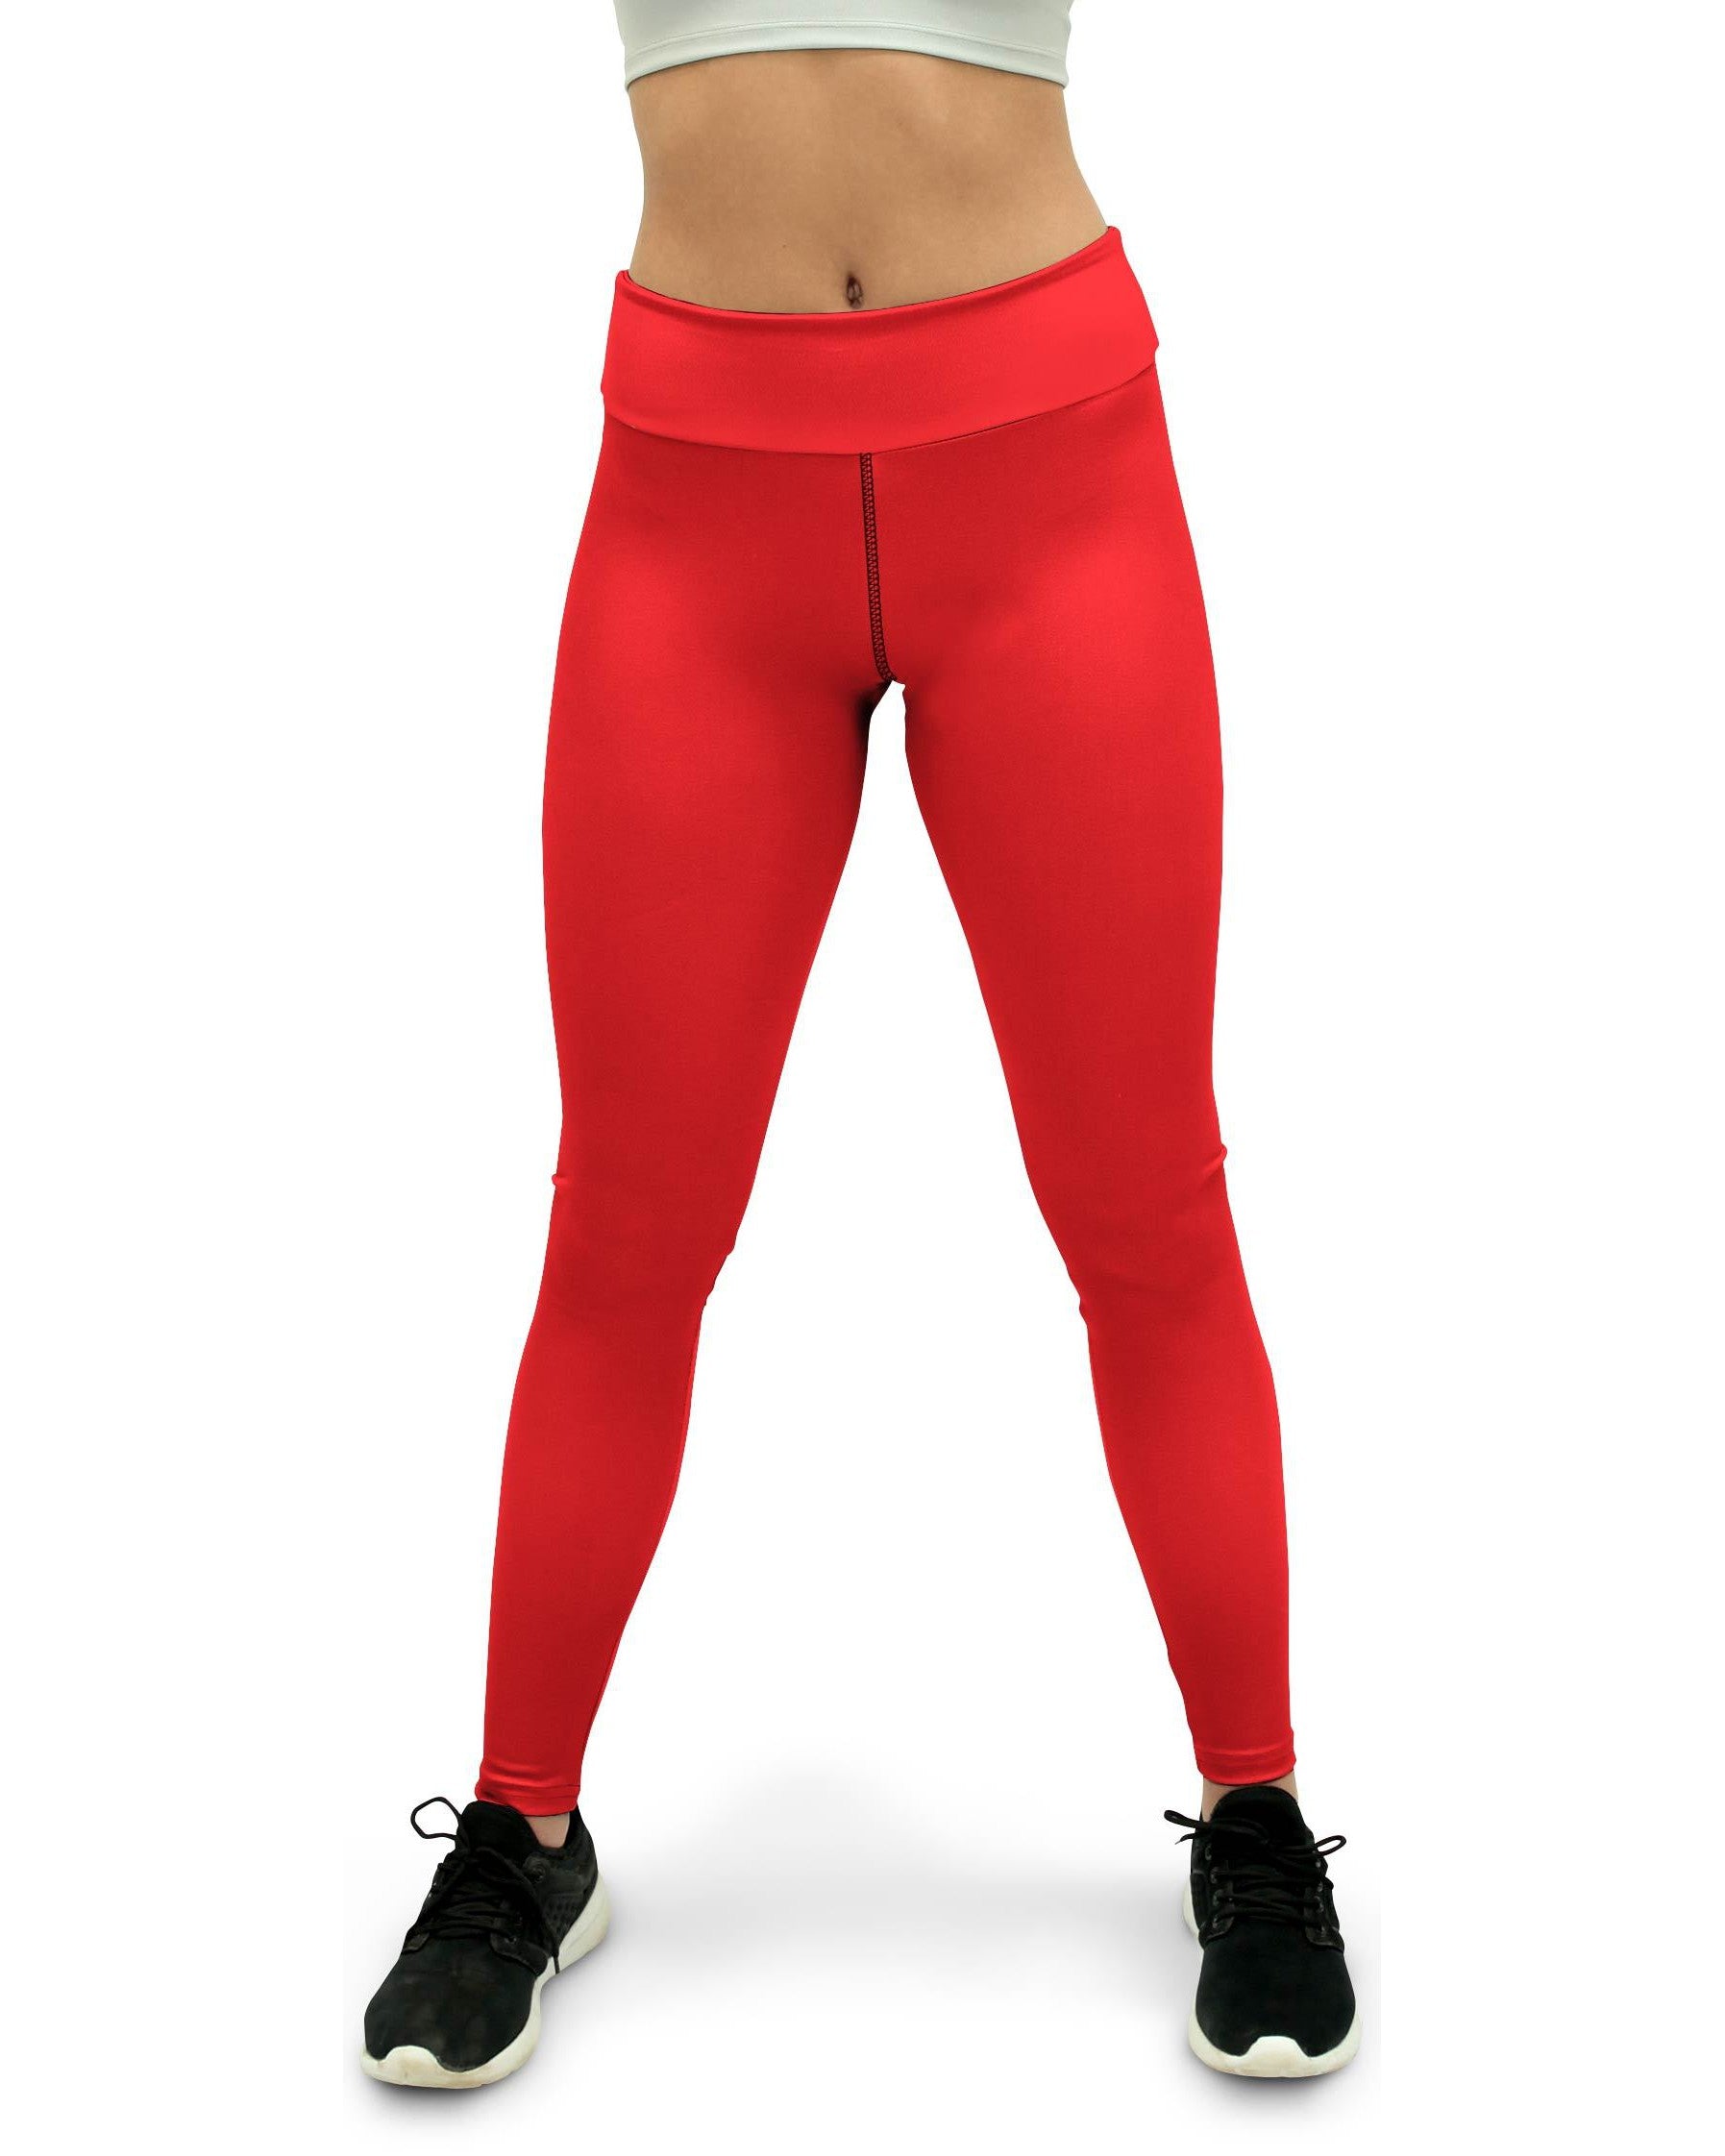 5 Day Red Workout Pants for push your ABS